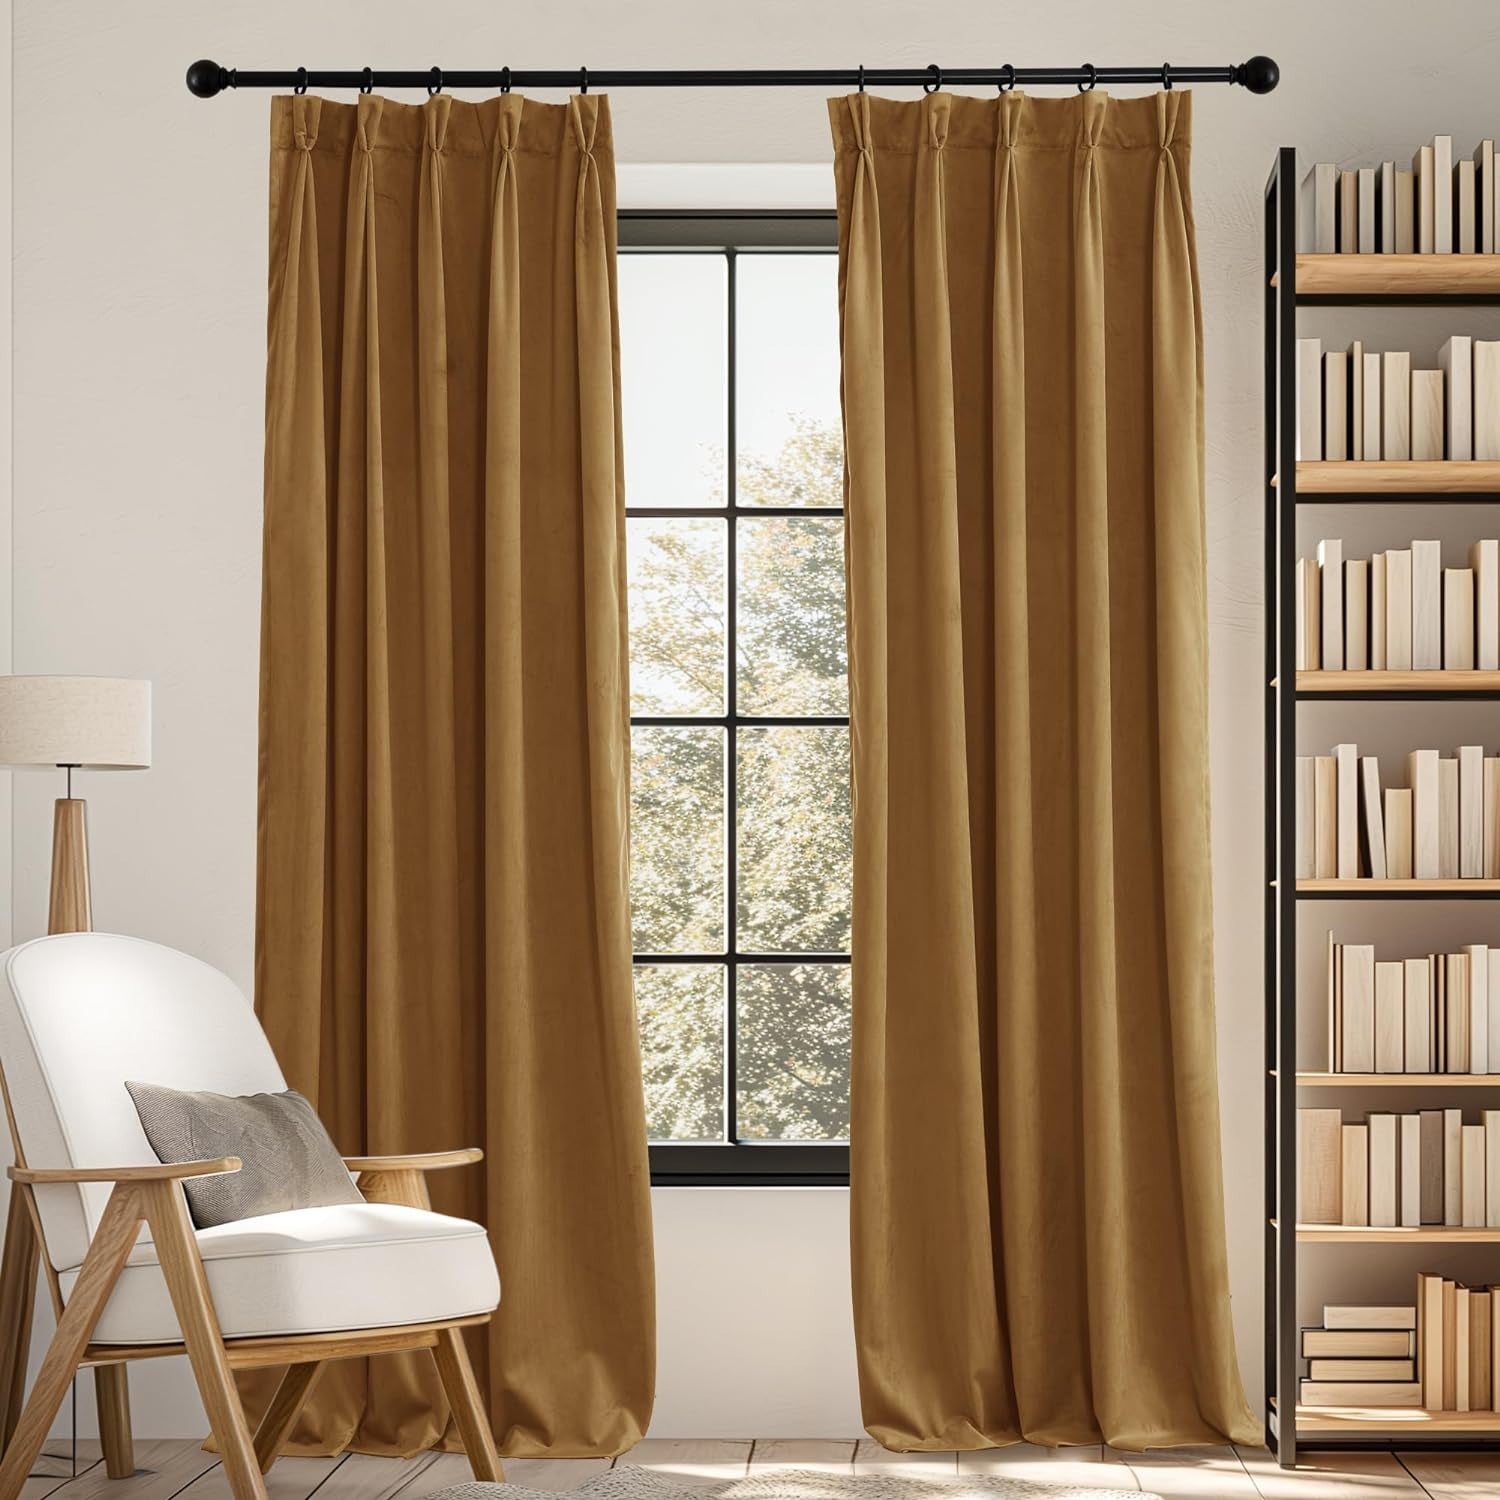 RYB HOME Pinch Pleated Velvet Curtains for Living Room, Blackout Thermal Insulated Noise Reducing Vintage Curtains for Dining Room Bedroom, Gold Brown, W34 X L84 Inches, 2 Panels  RYB HOME   